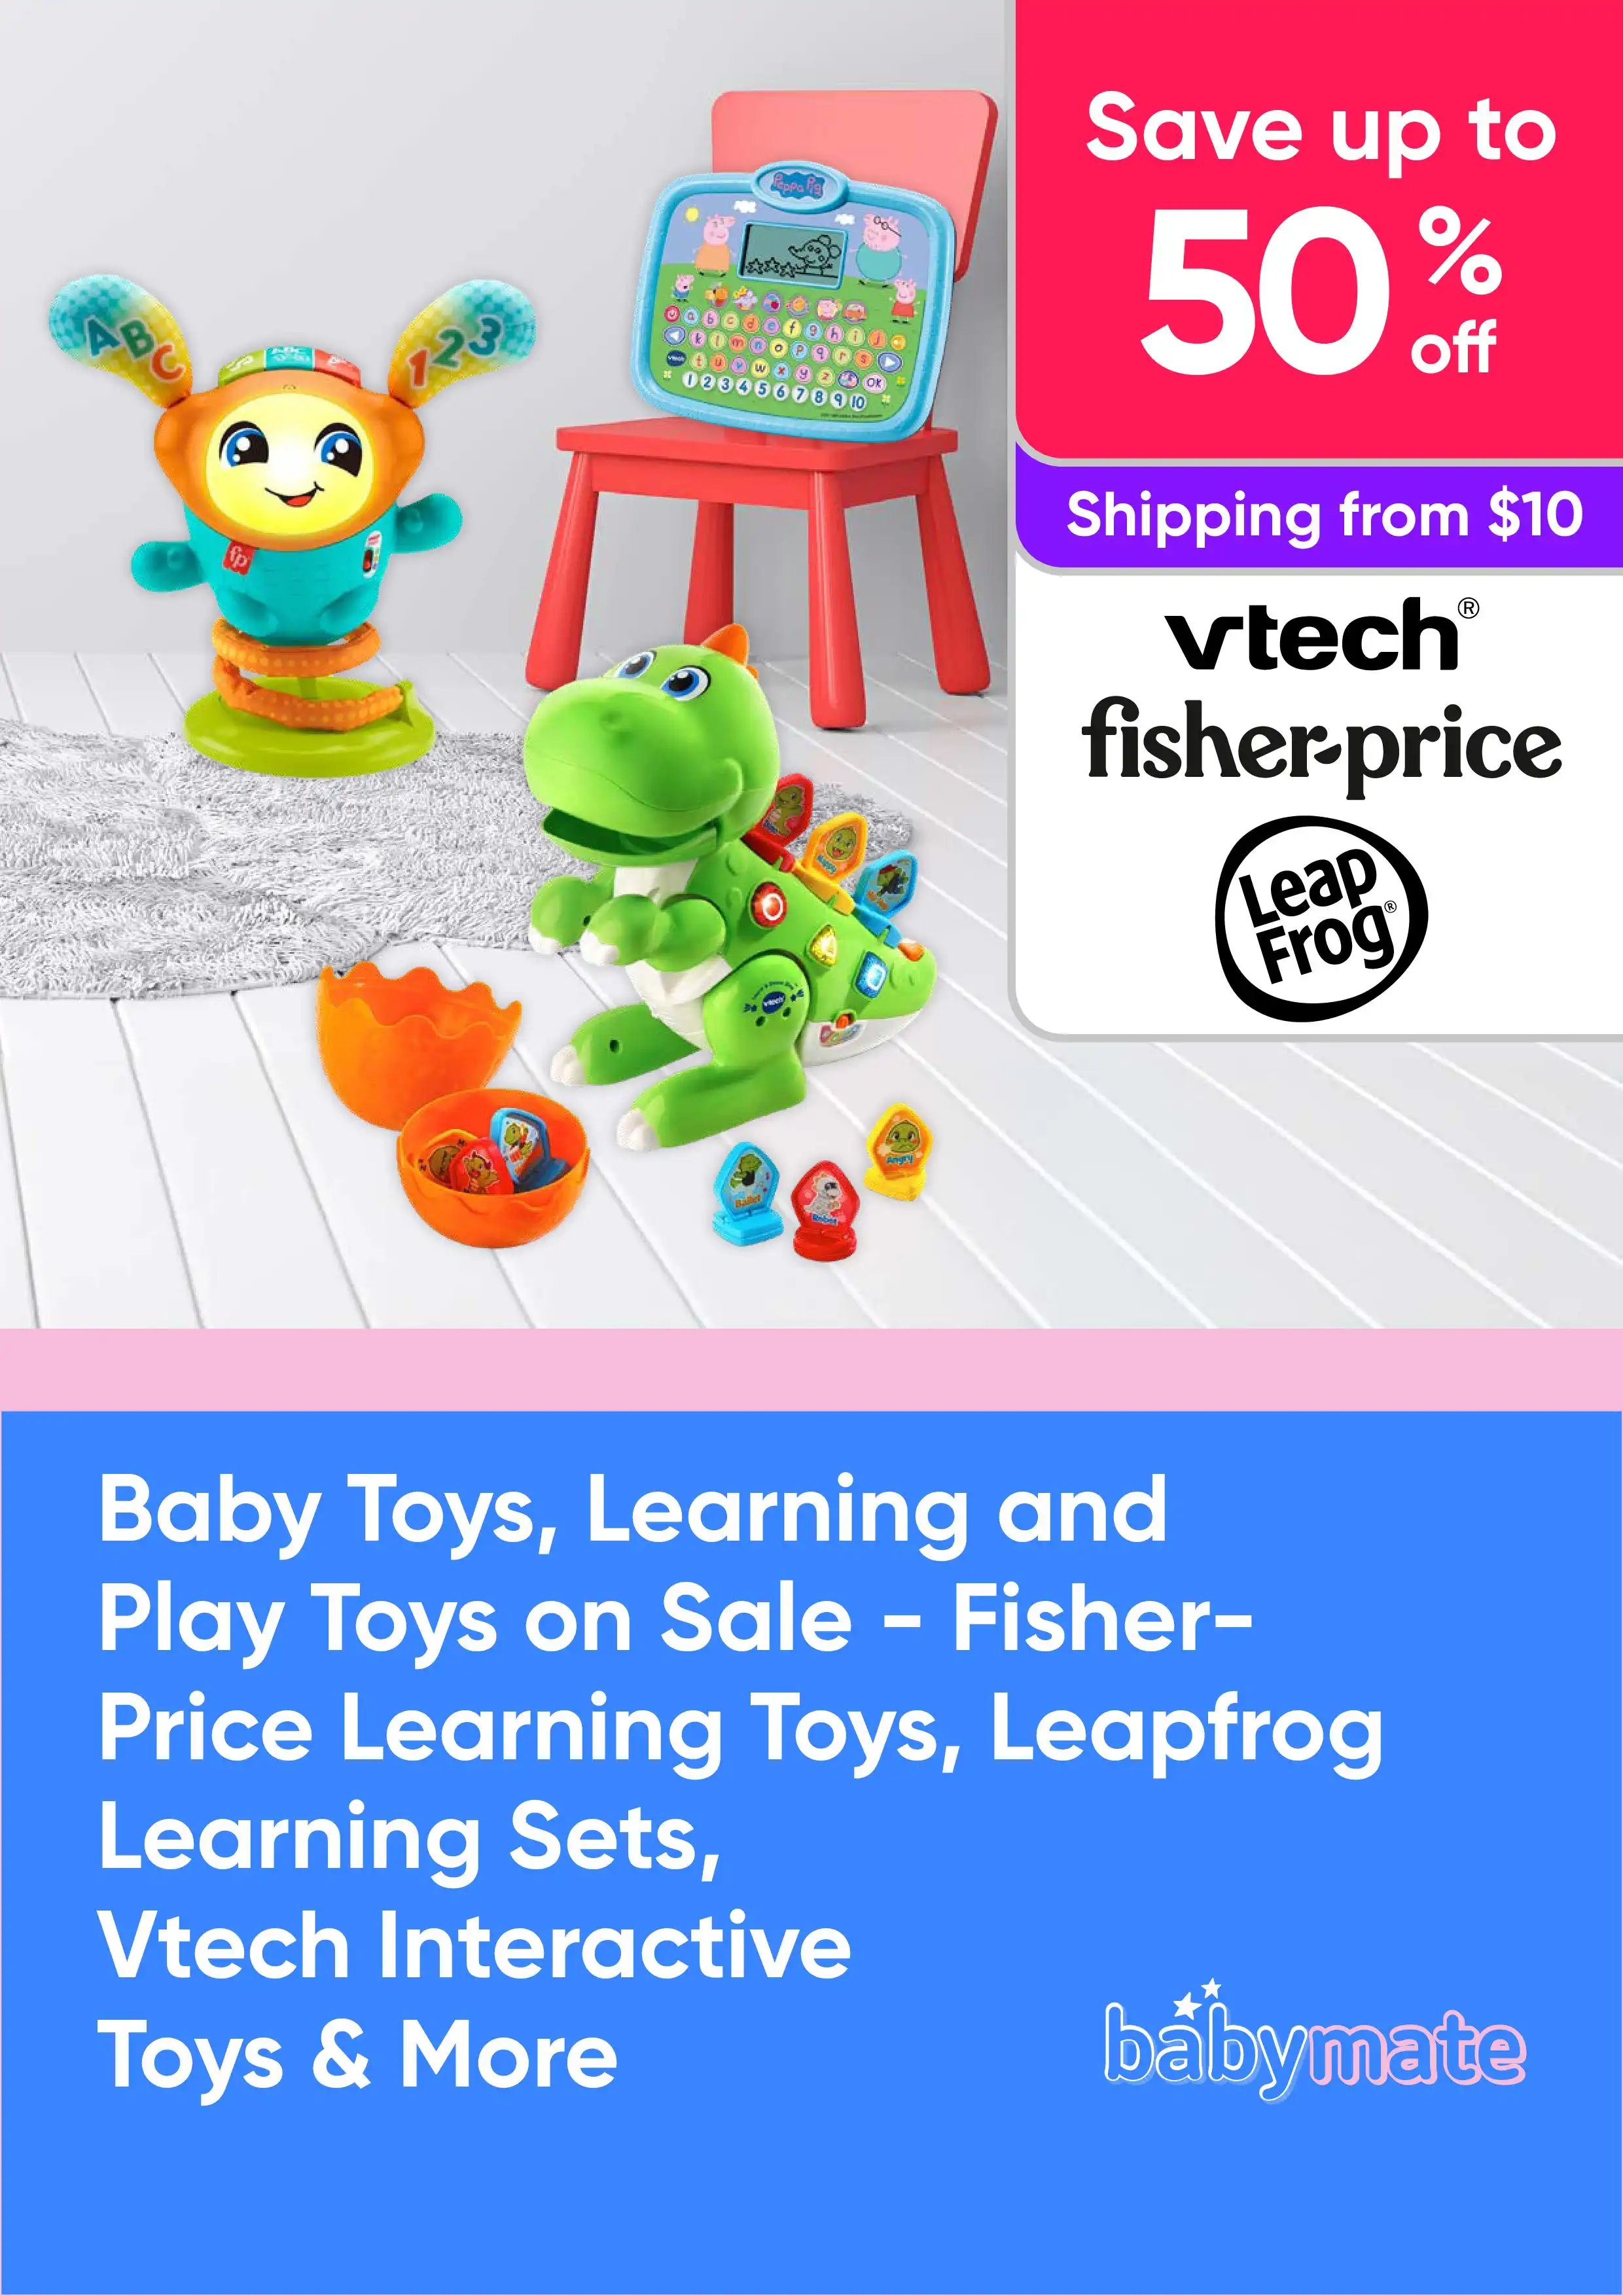 Baby Toys, Learning and Play Toys on Sale